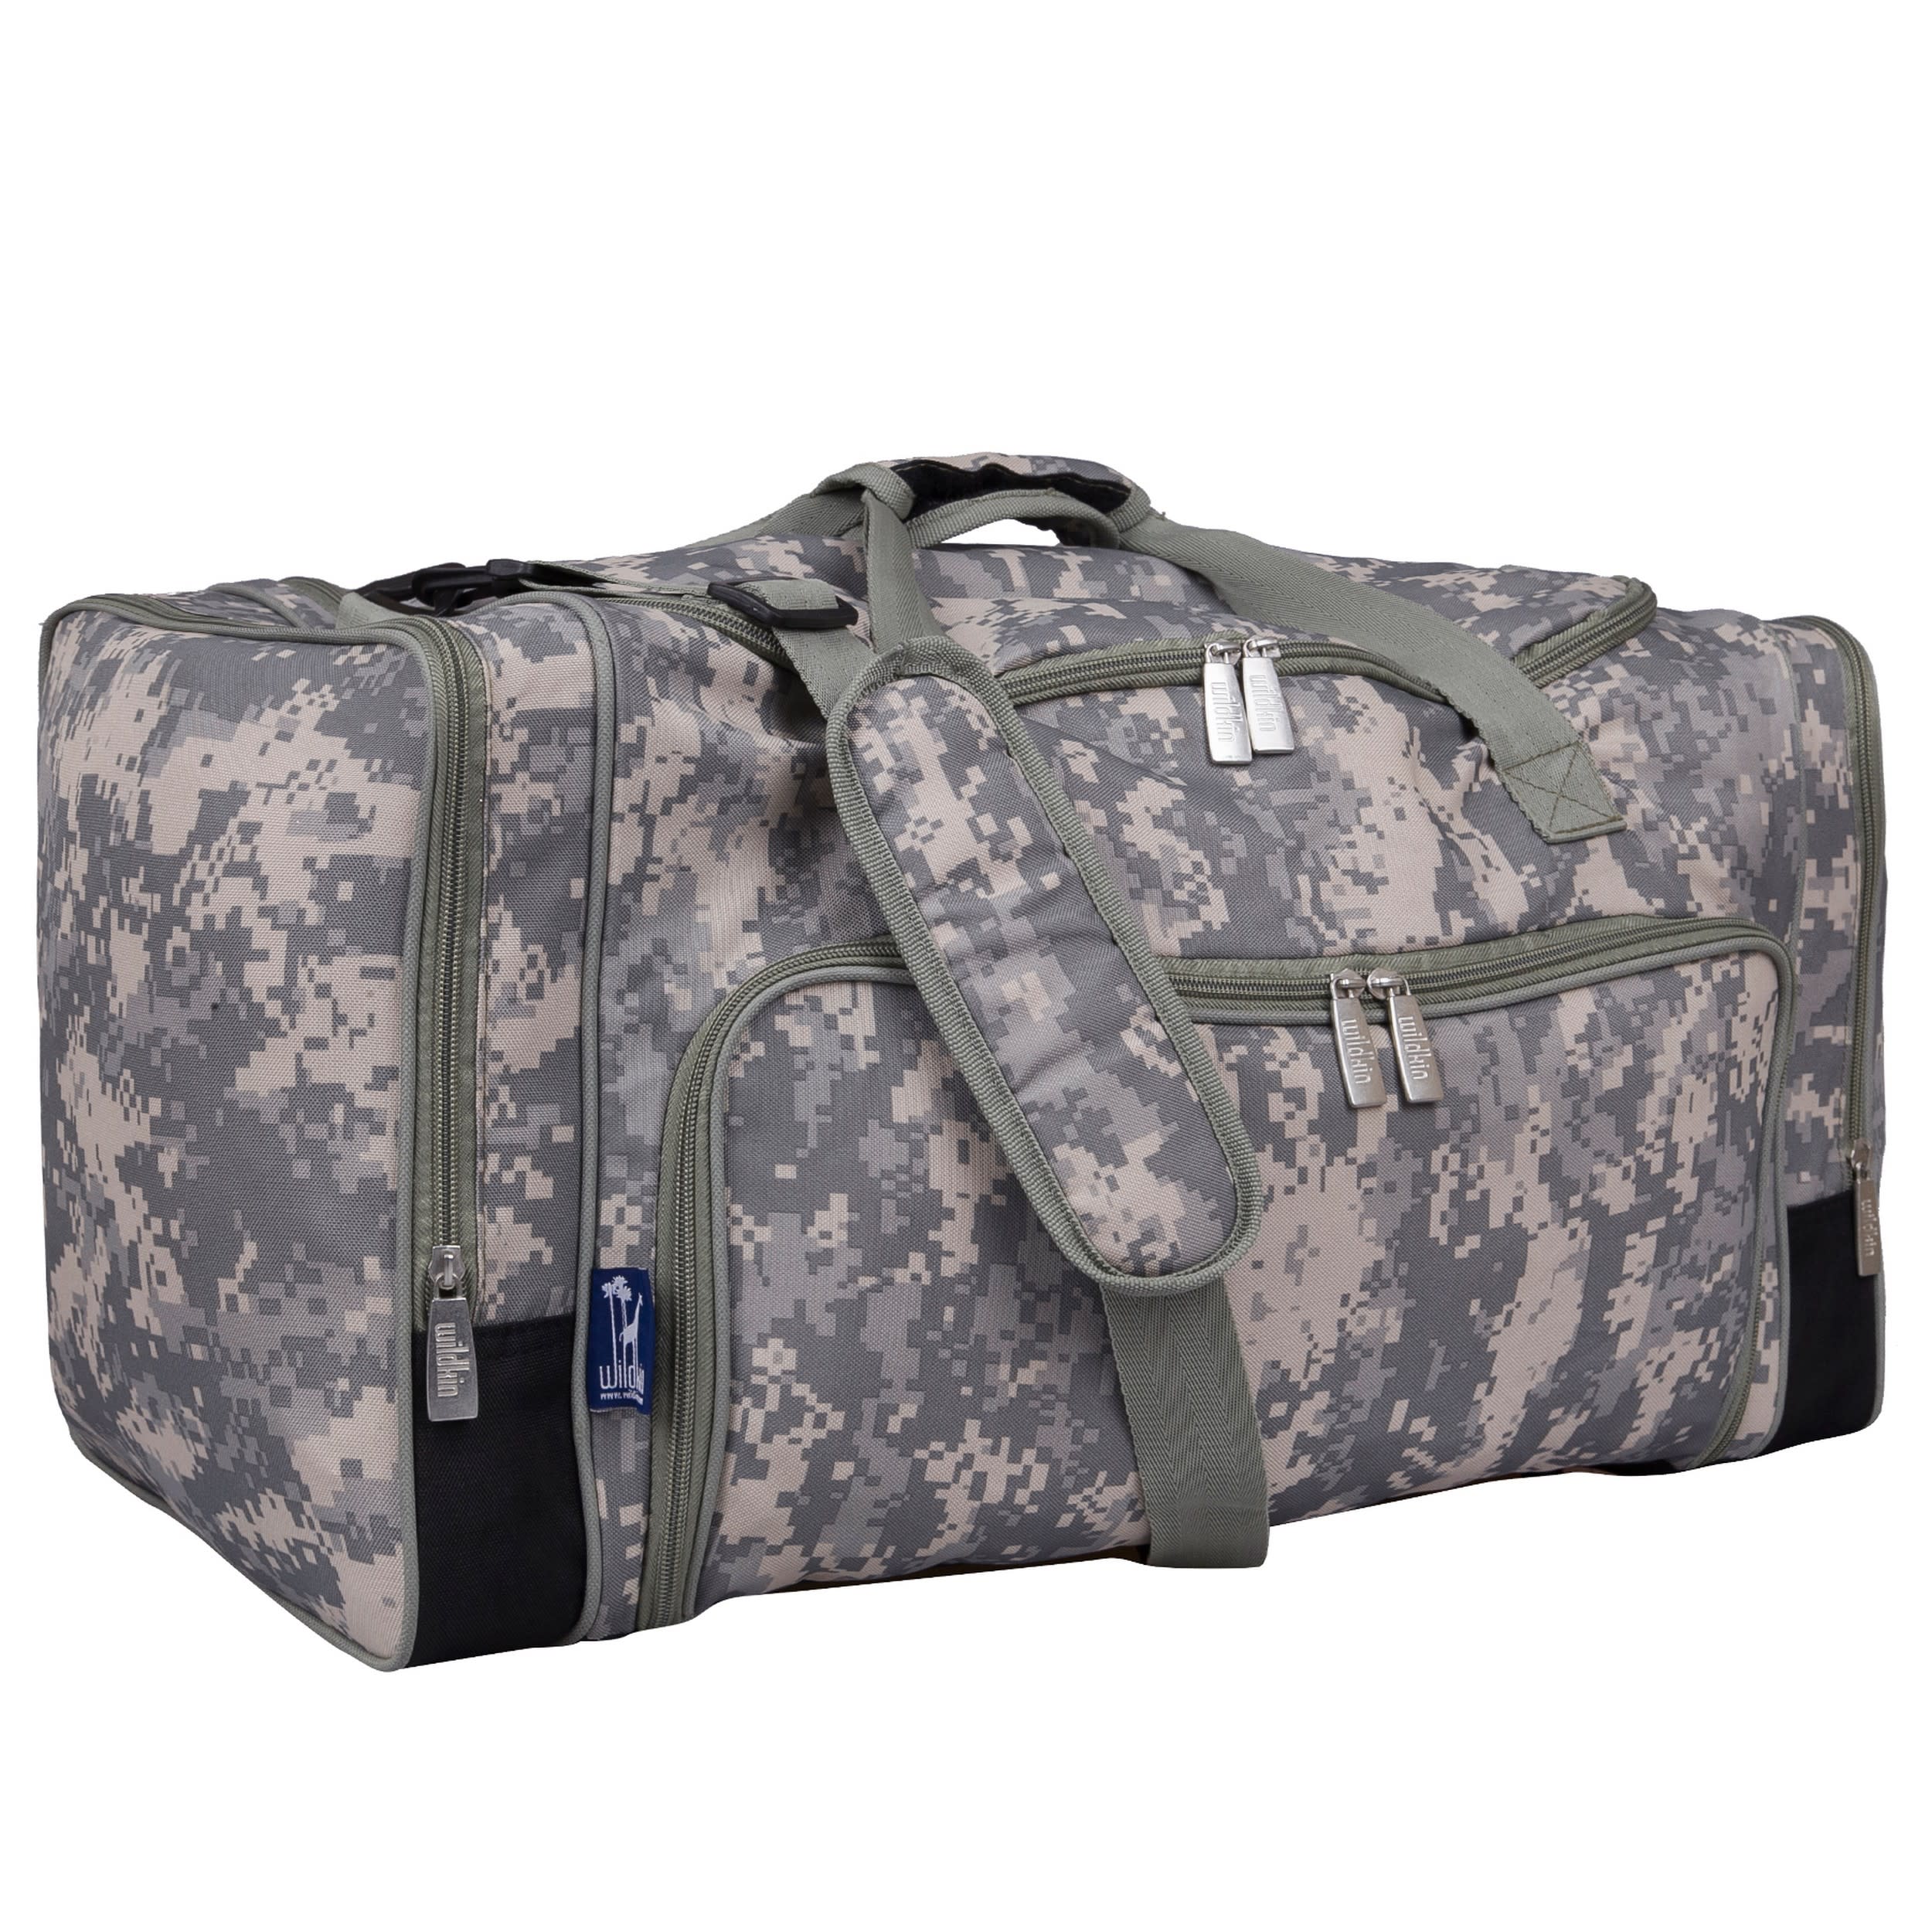 Lawenp Camouflage Lunch Bag Kids Lunch Box Tote Bag Lunch Box